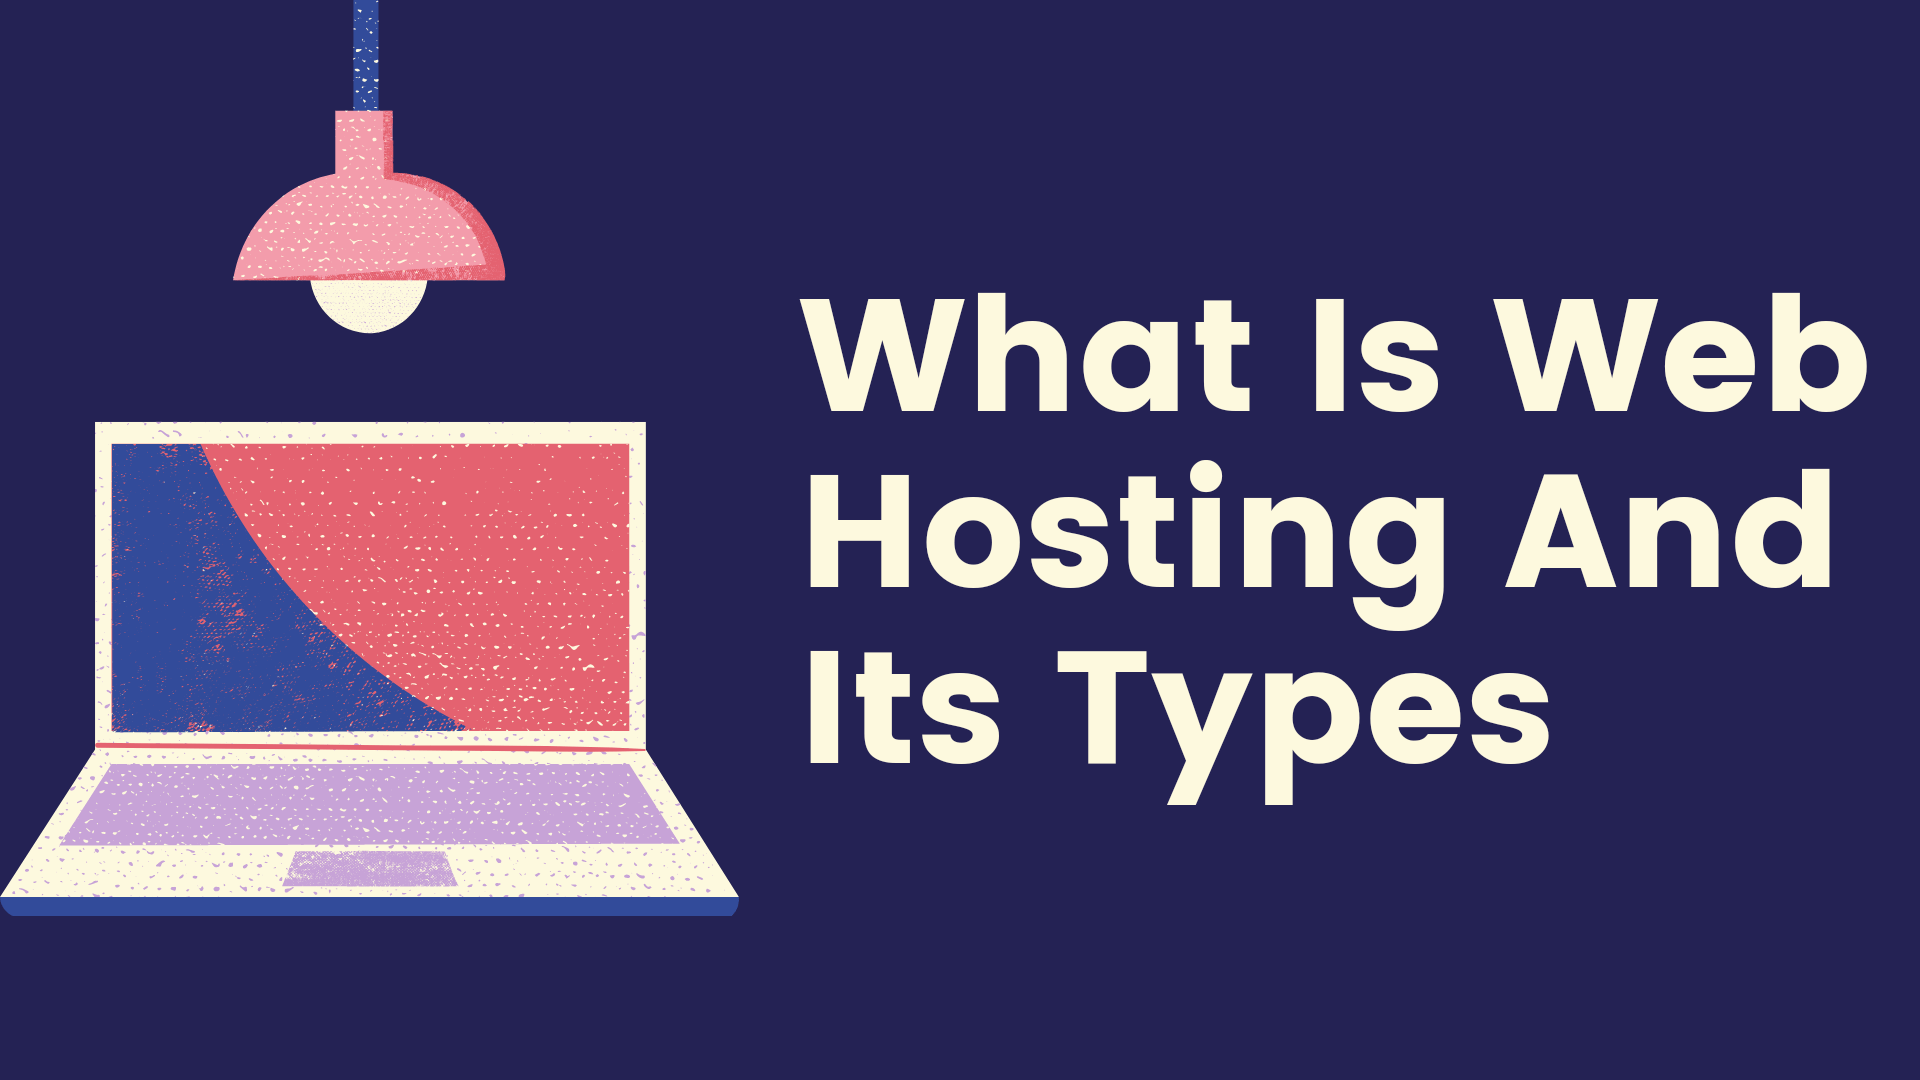 The image is a graphic related to: web hosting and its types.